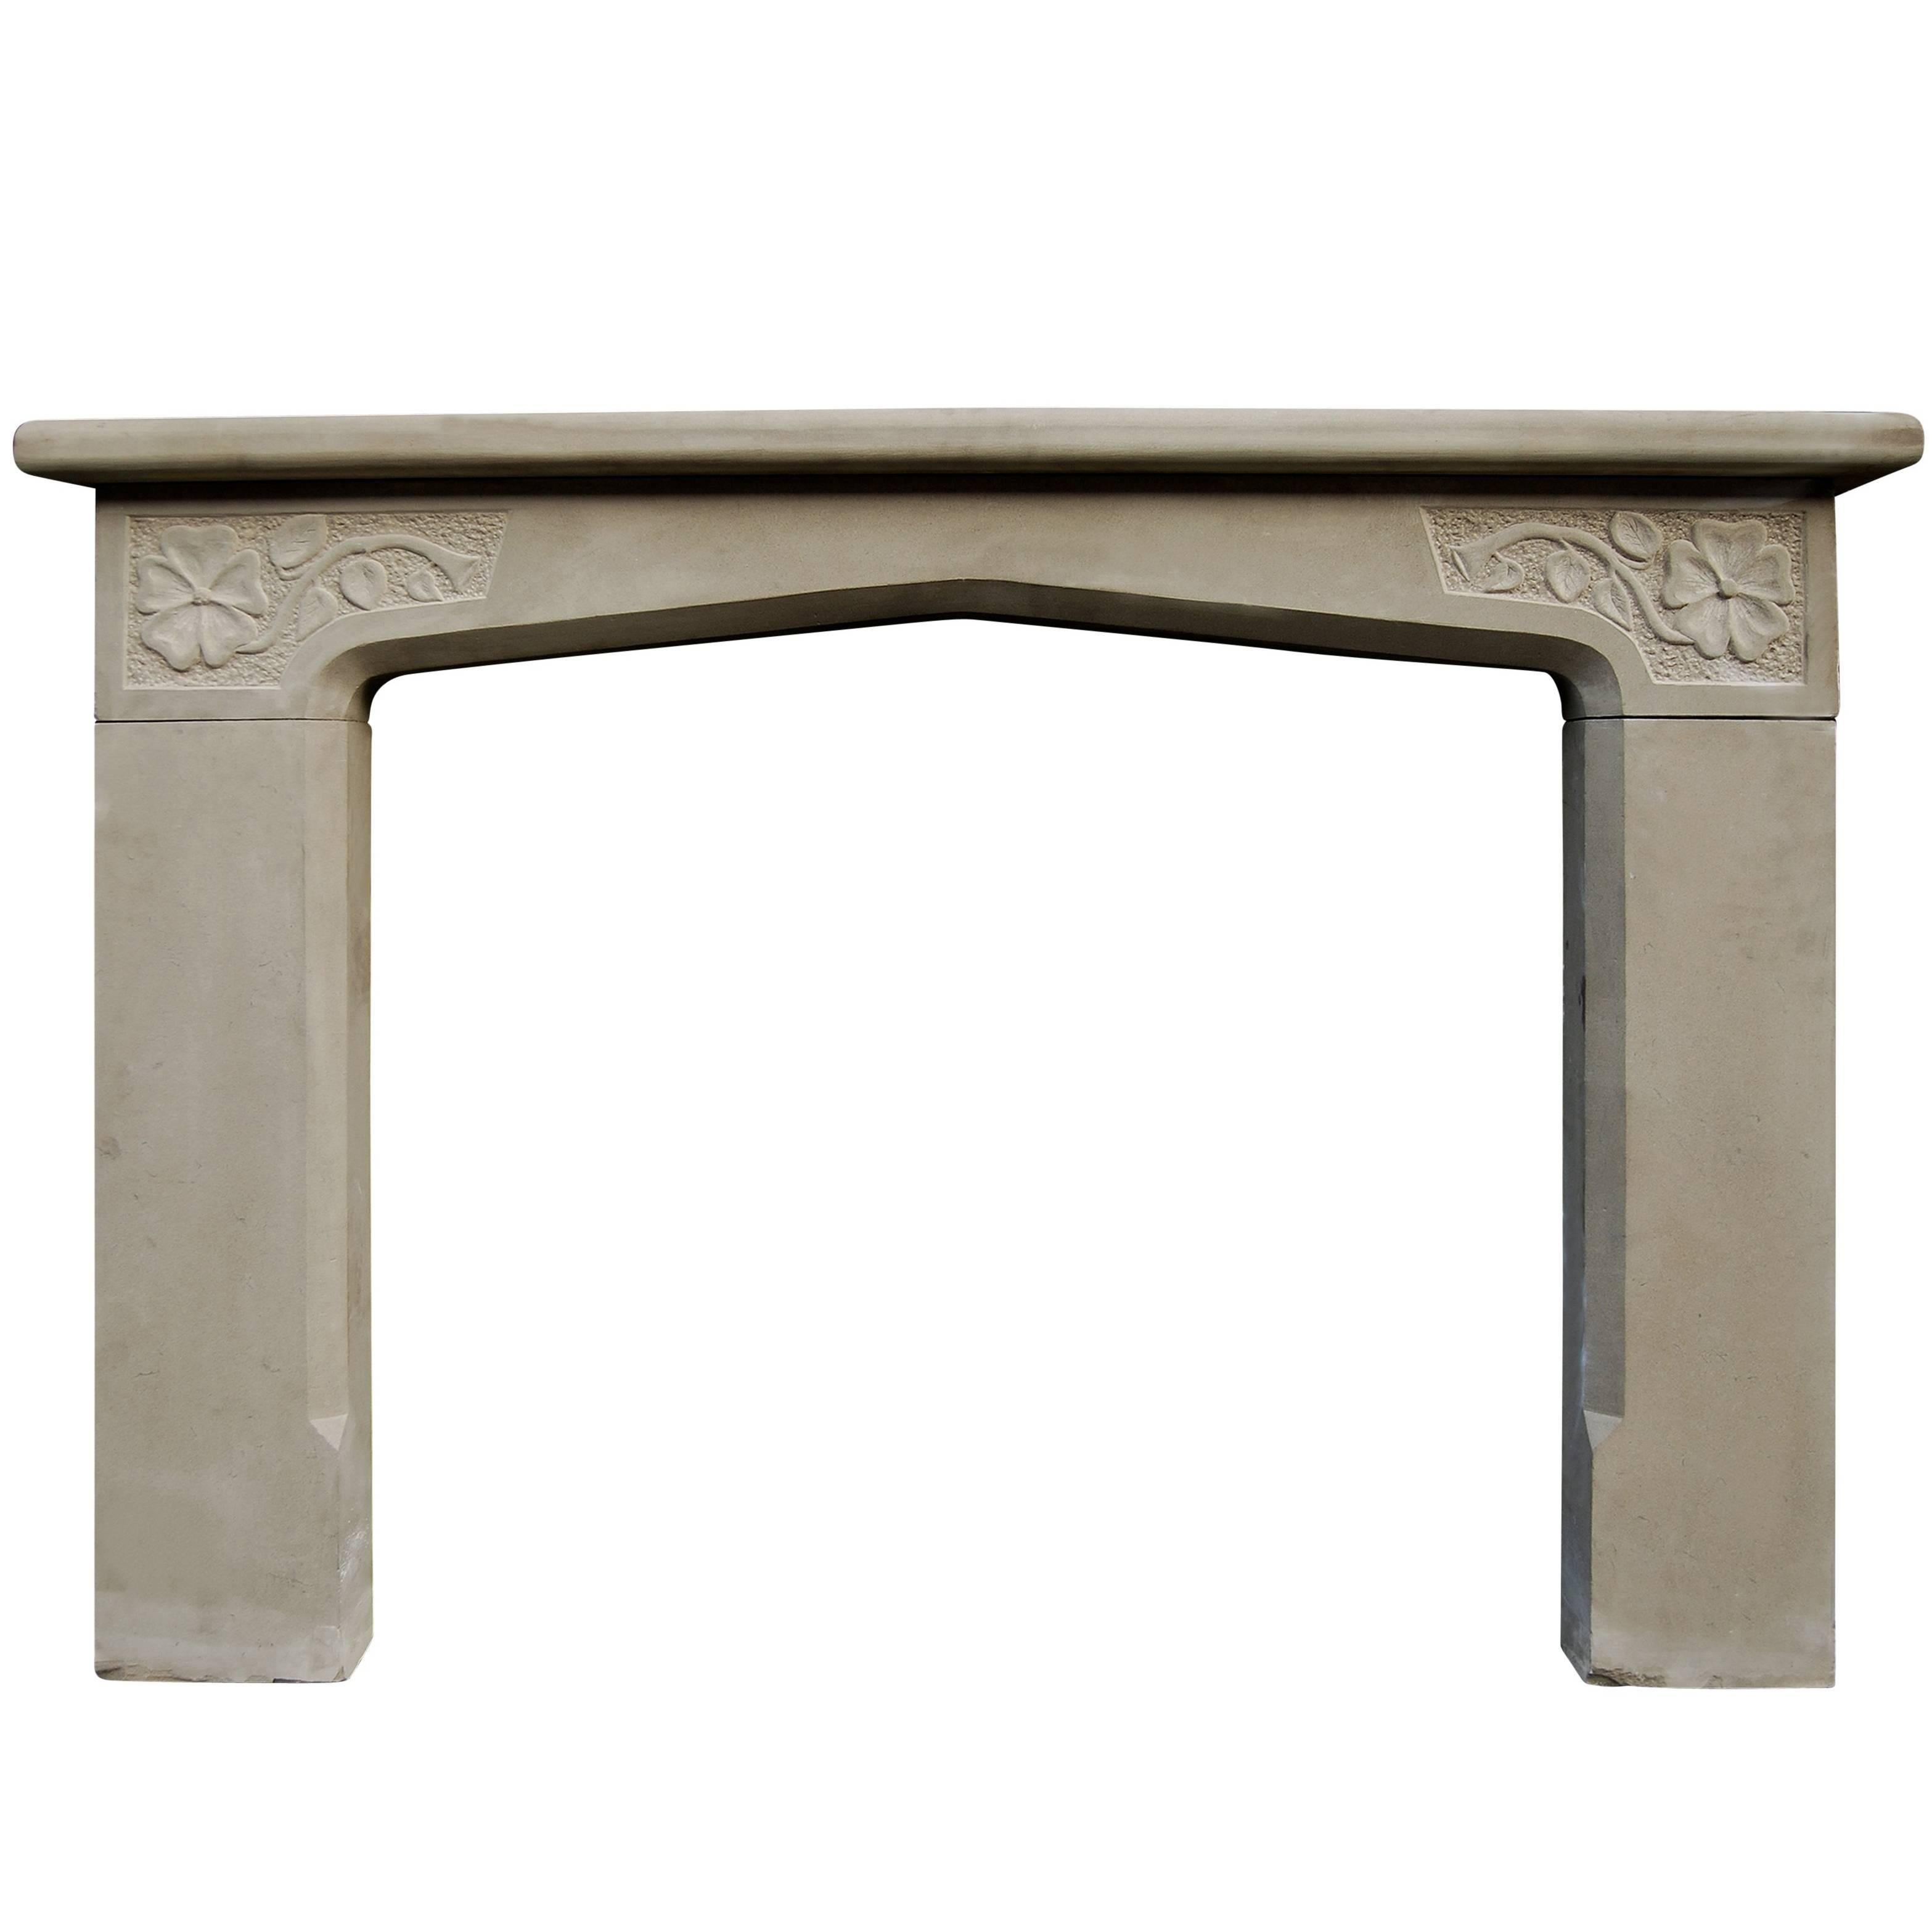 20th Century Limestone English Fireplace in the Tudor Manner